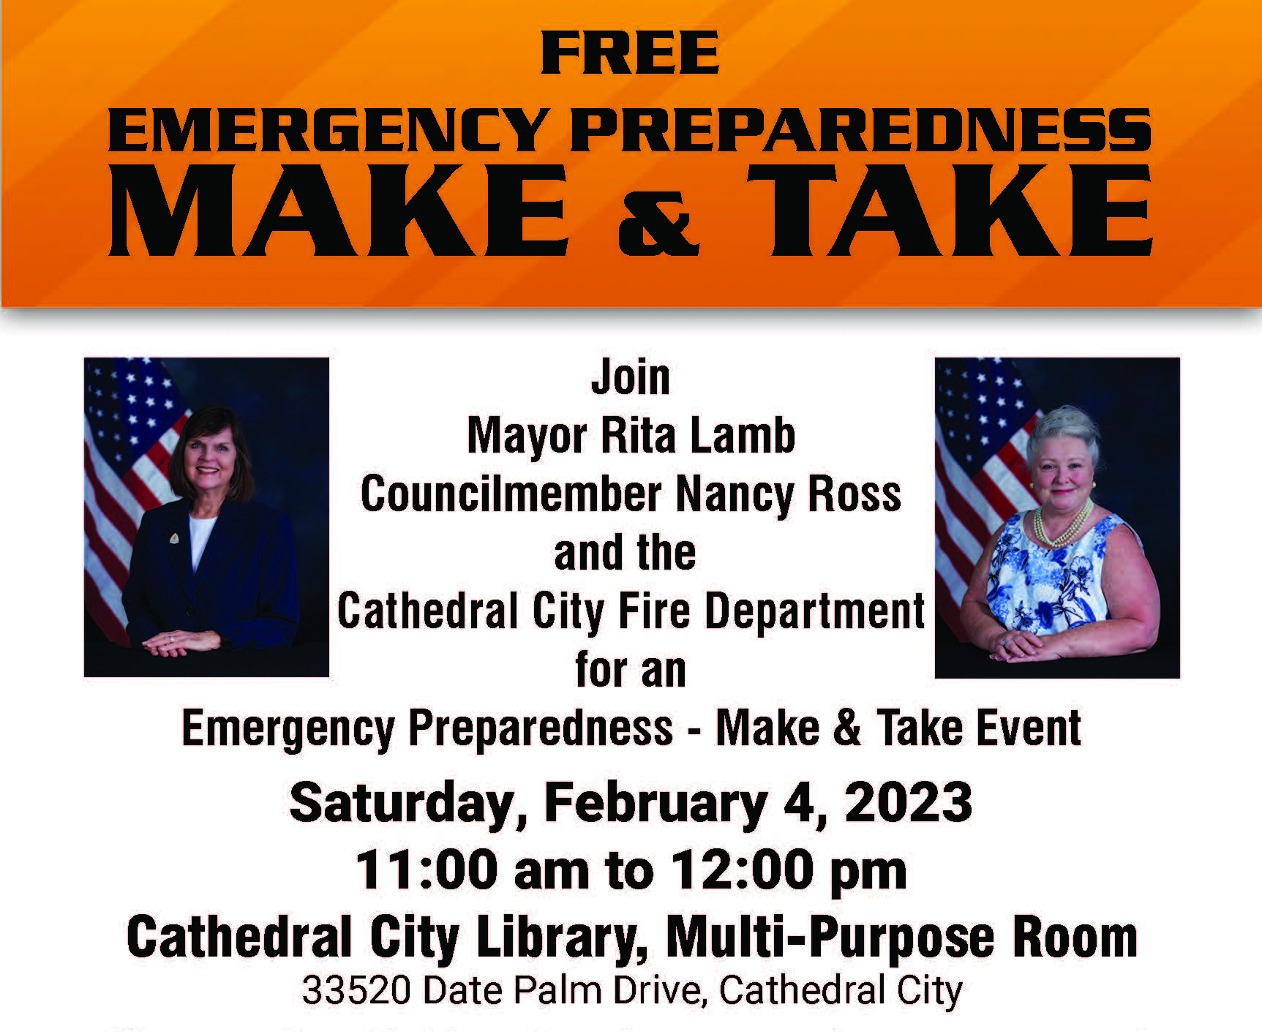 Join Mayor Rita Lamb, Councilmember Nancy Ross & Cathedral City Fire for Emergency Preparedness Event